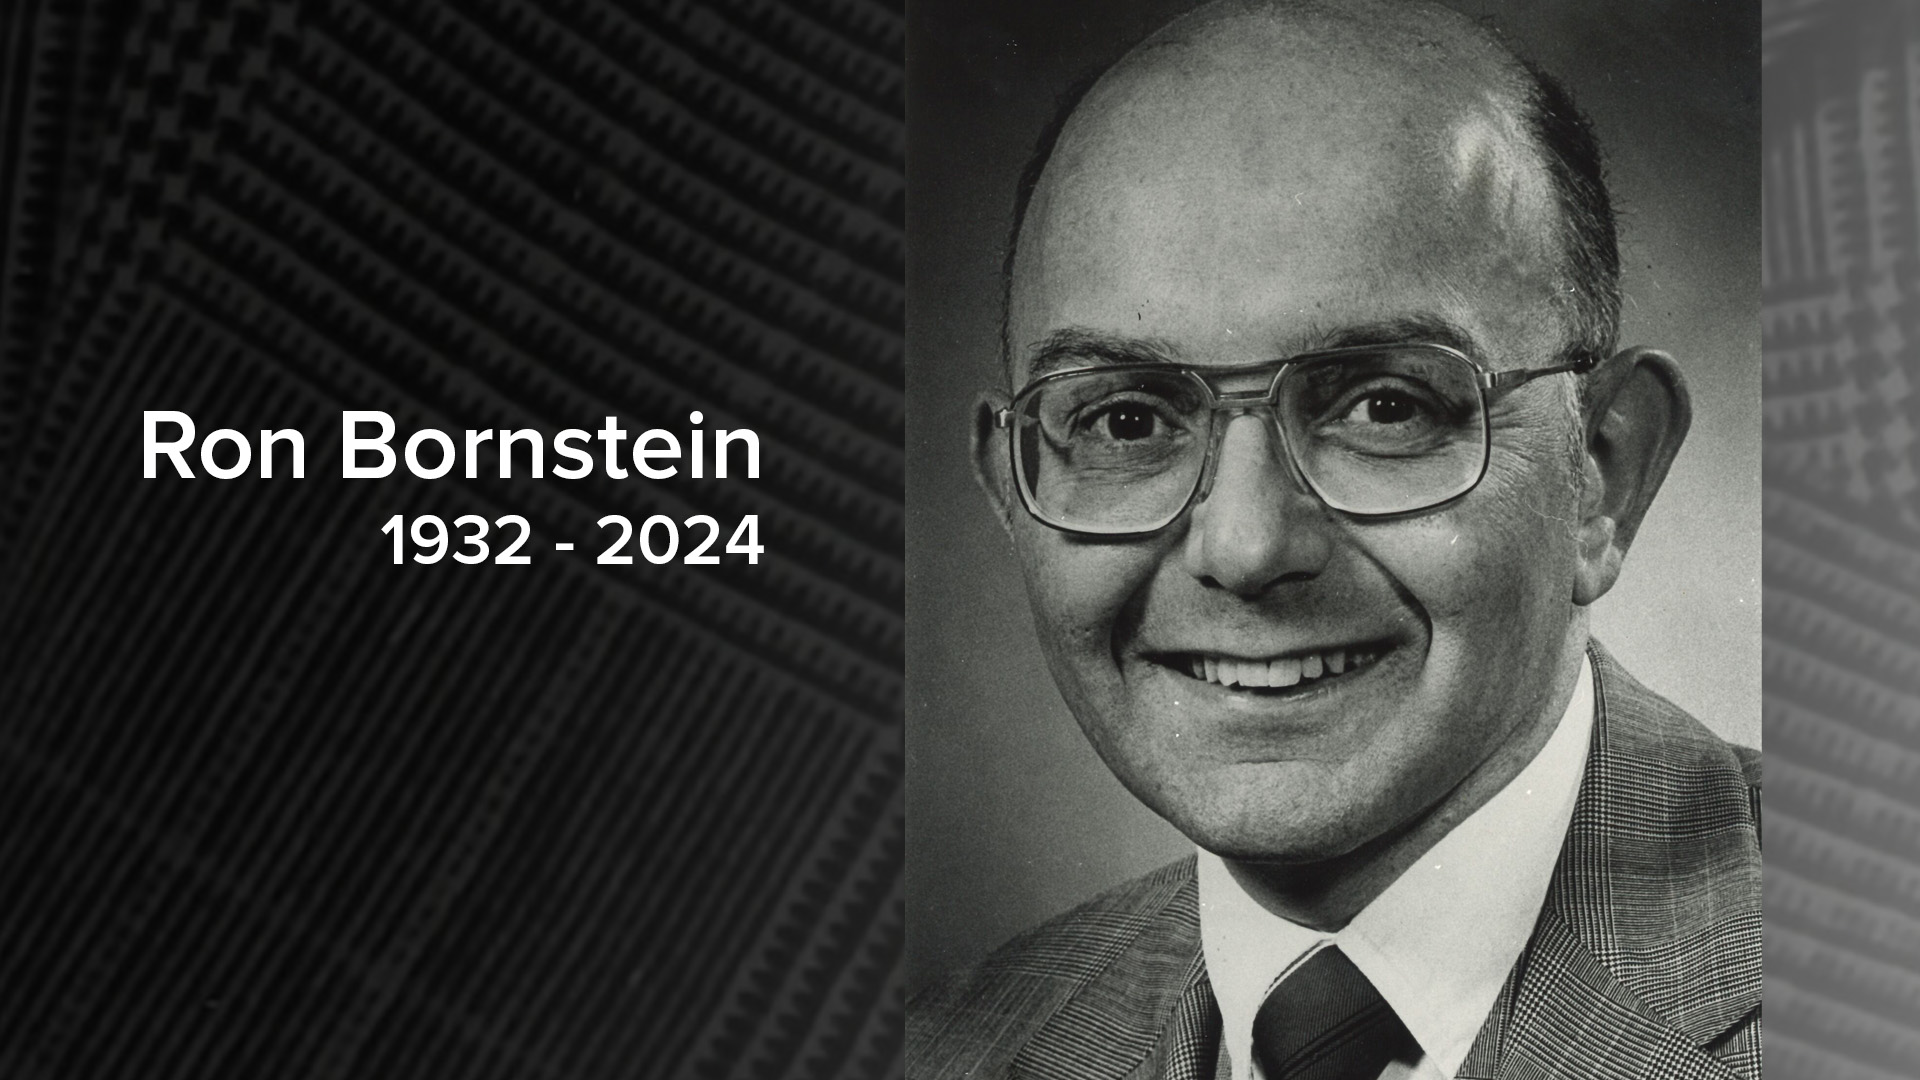 A black and white photo of Ron Bornstein, smiling while wearing glasses and a suit approximately in the 1980s.